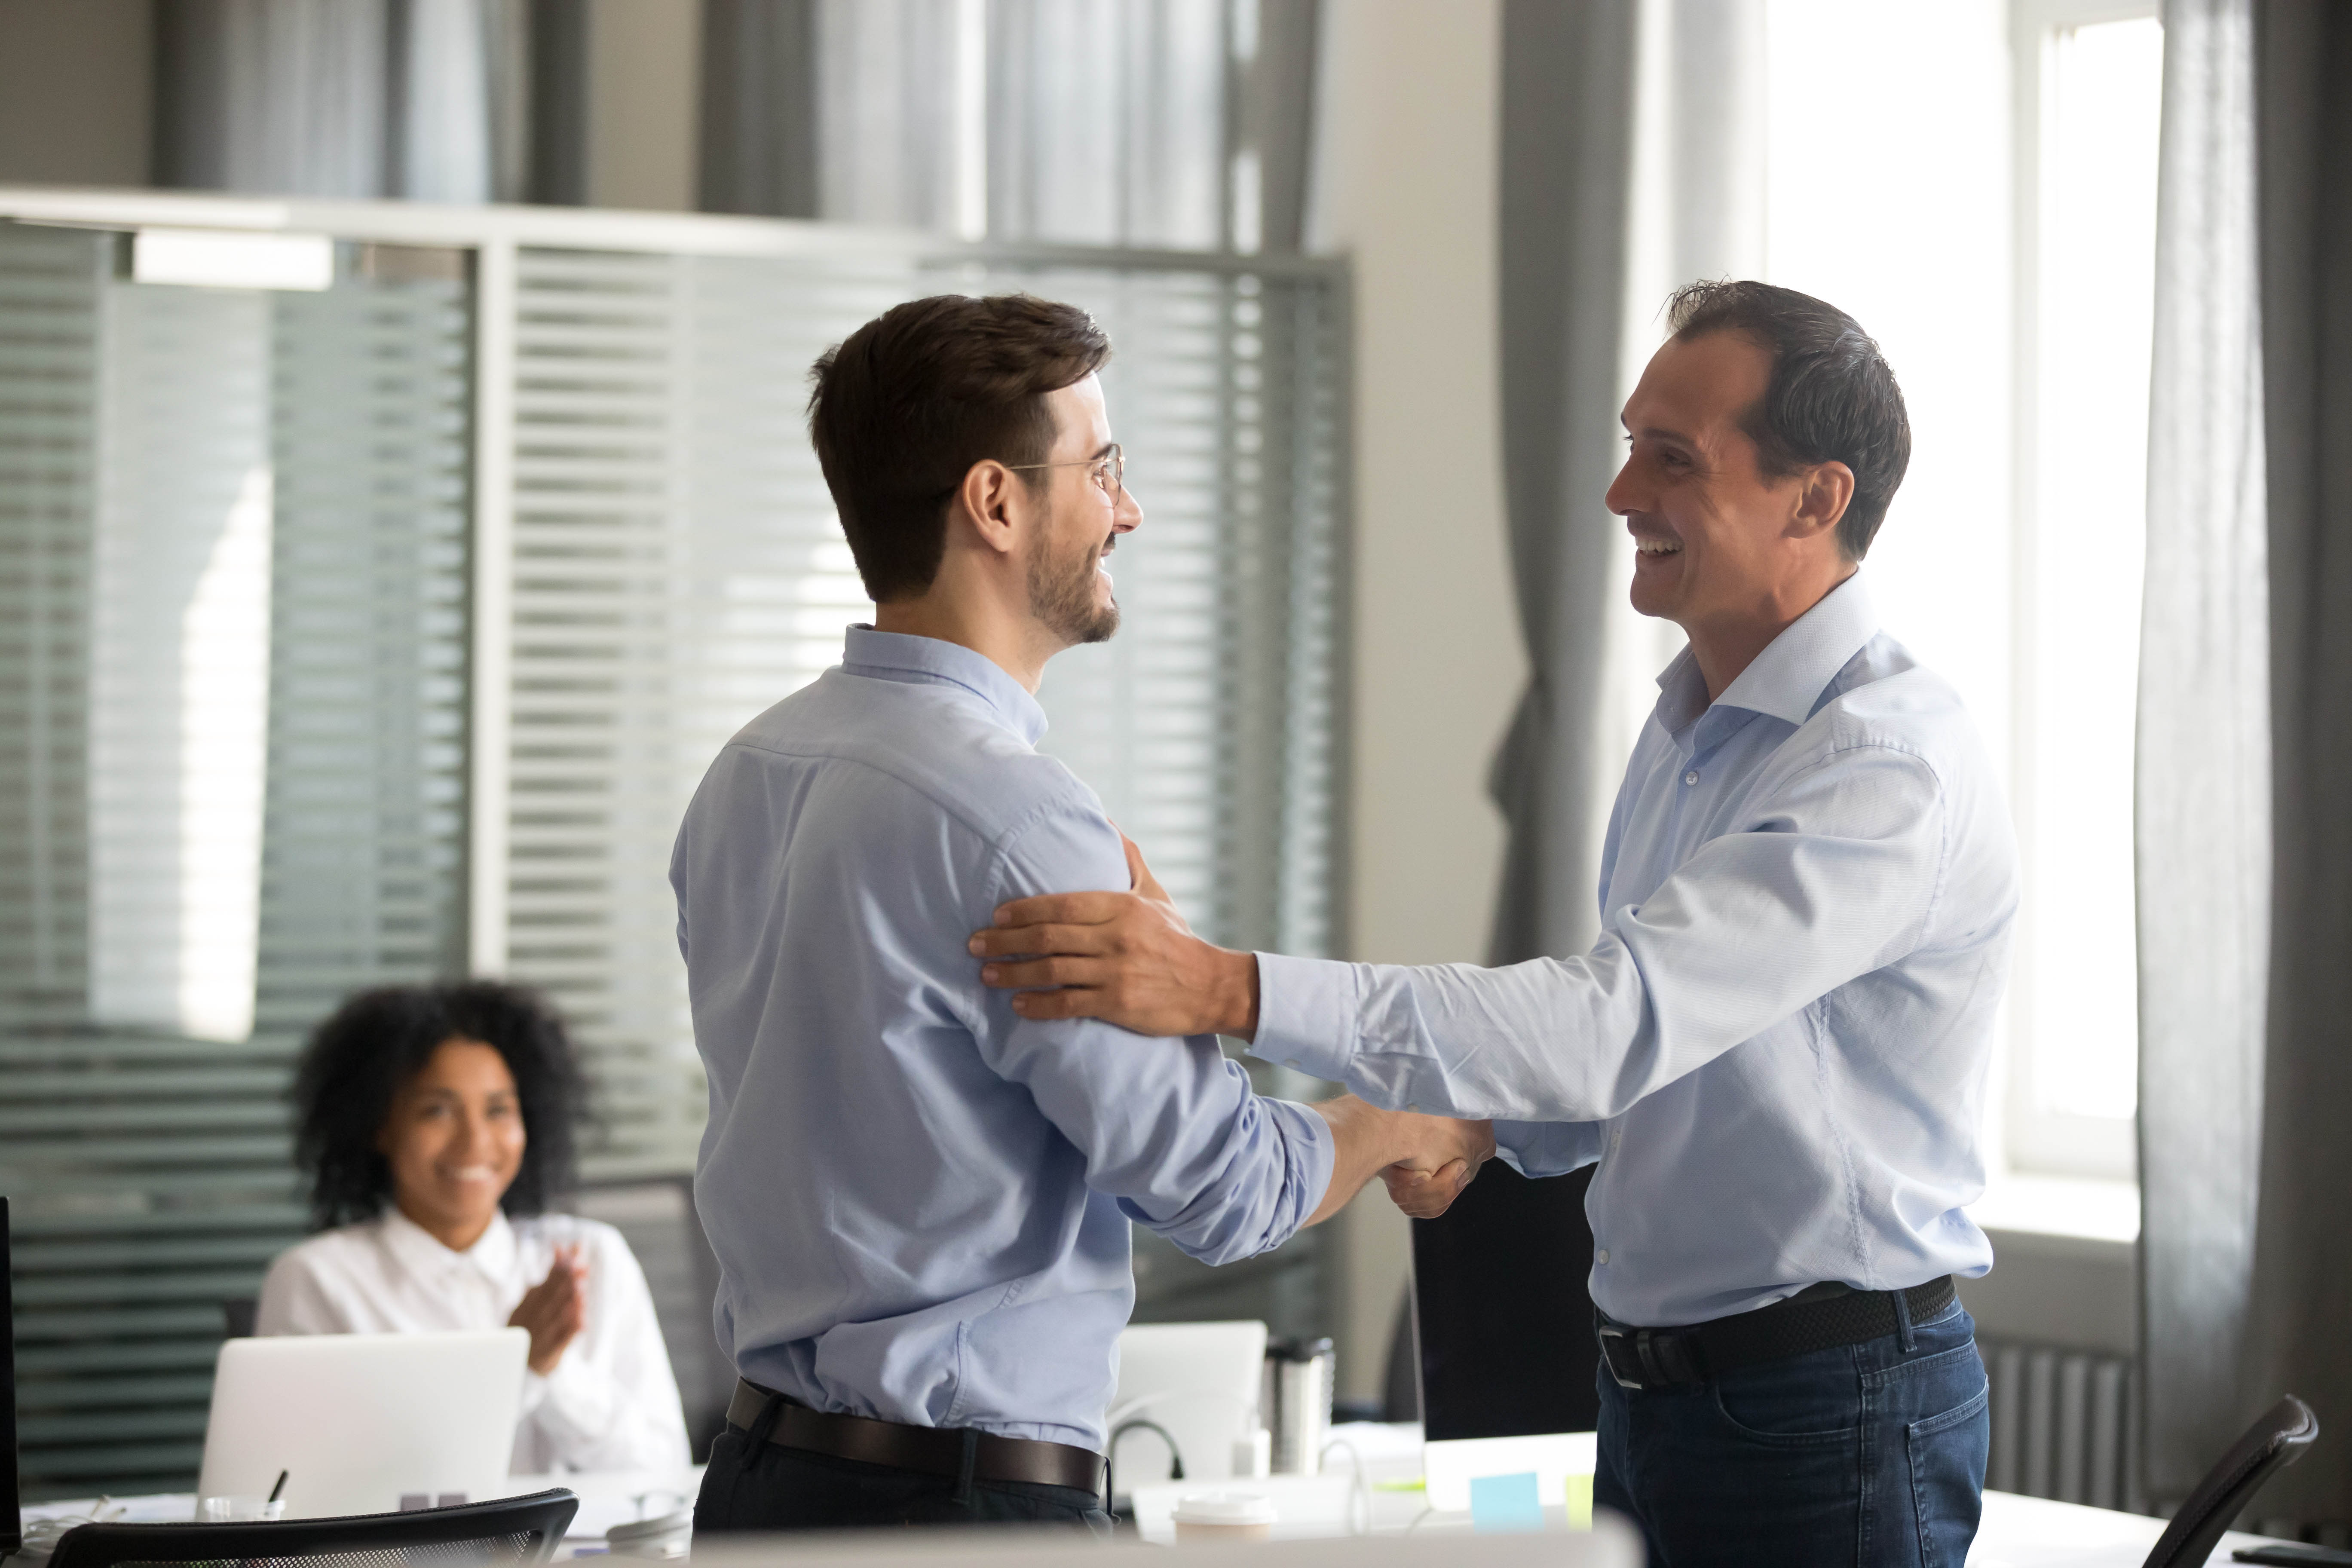 Male boss showing support and appreciation for his male colleague with a hand on his back and handshake in a meeting room